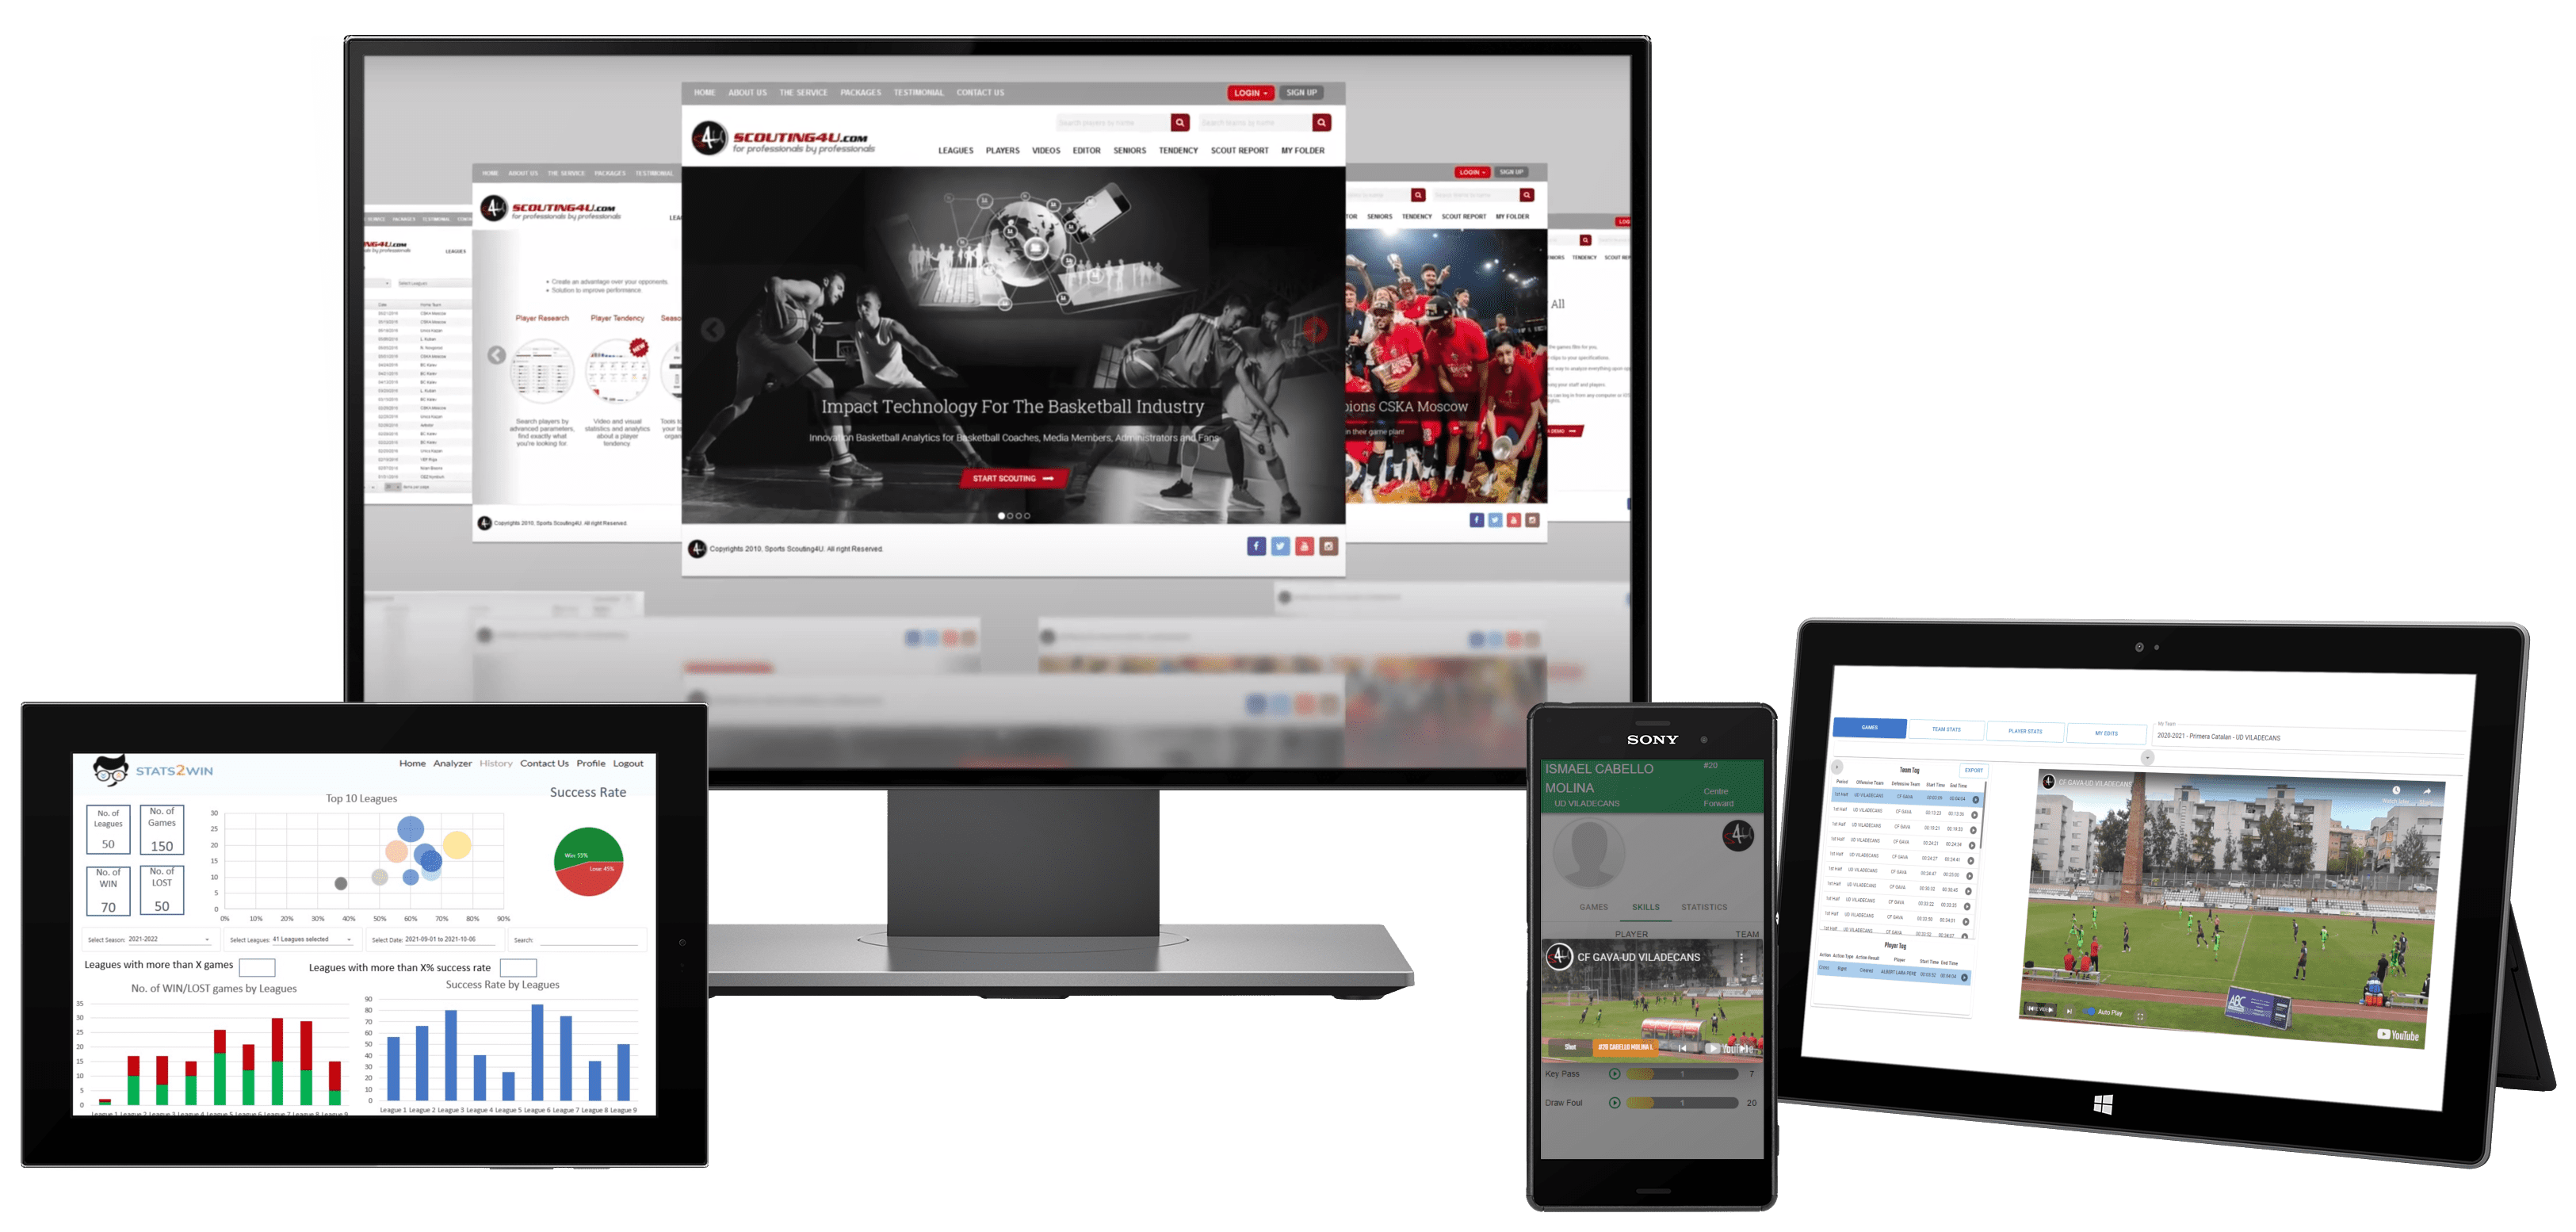 Scouting4U plateforme recrutement statistique scouting basketball